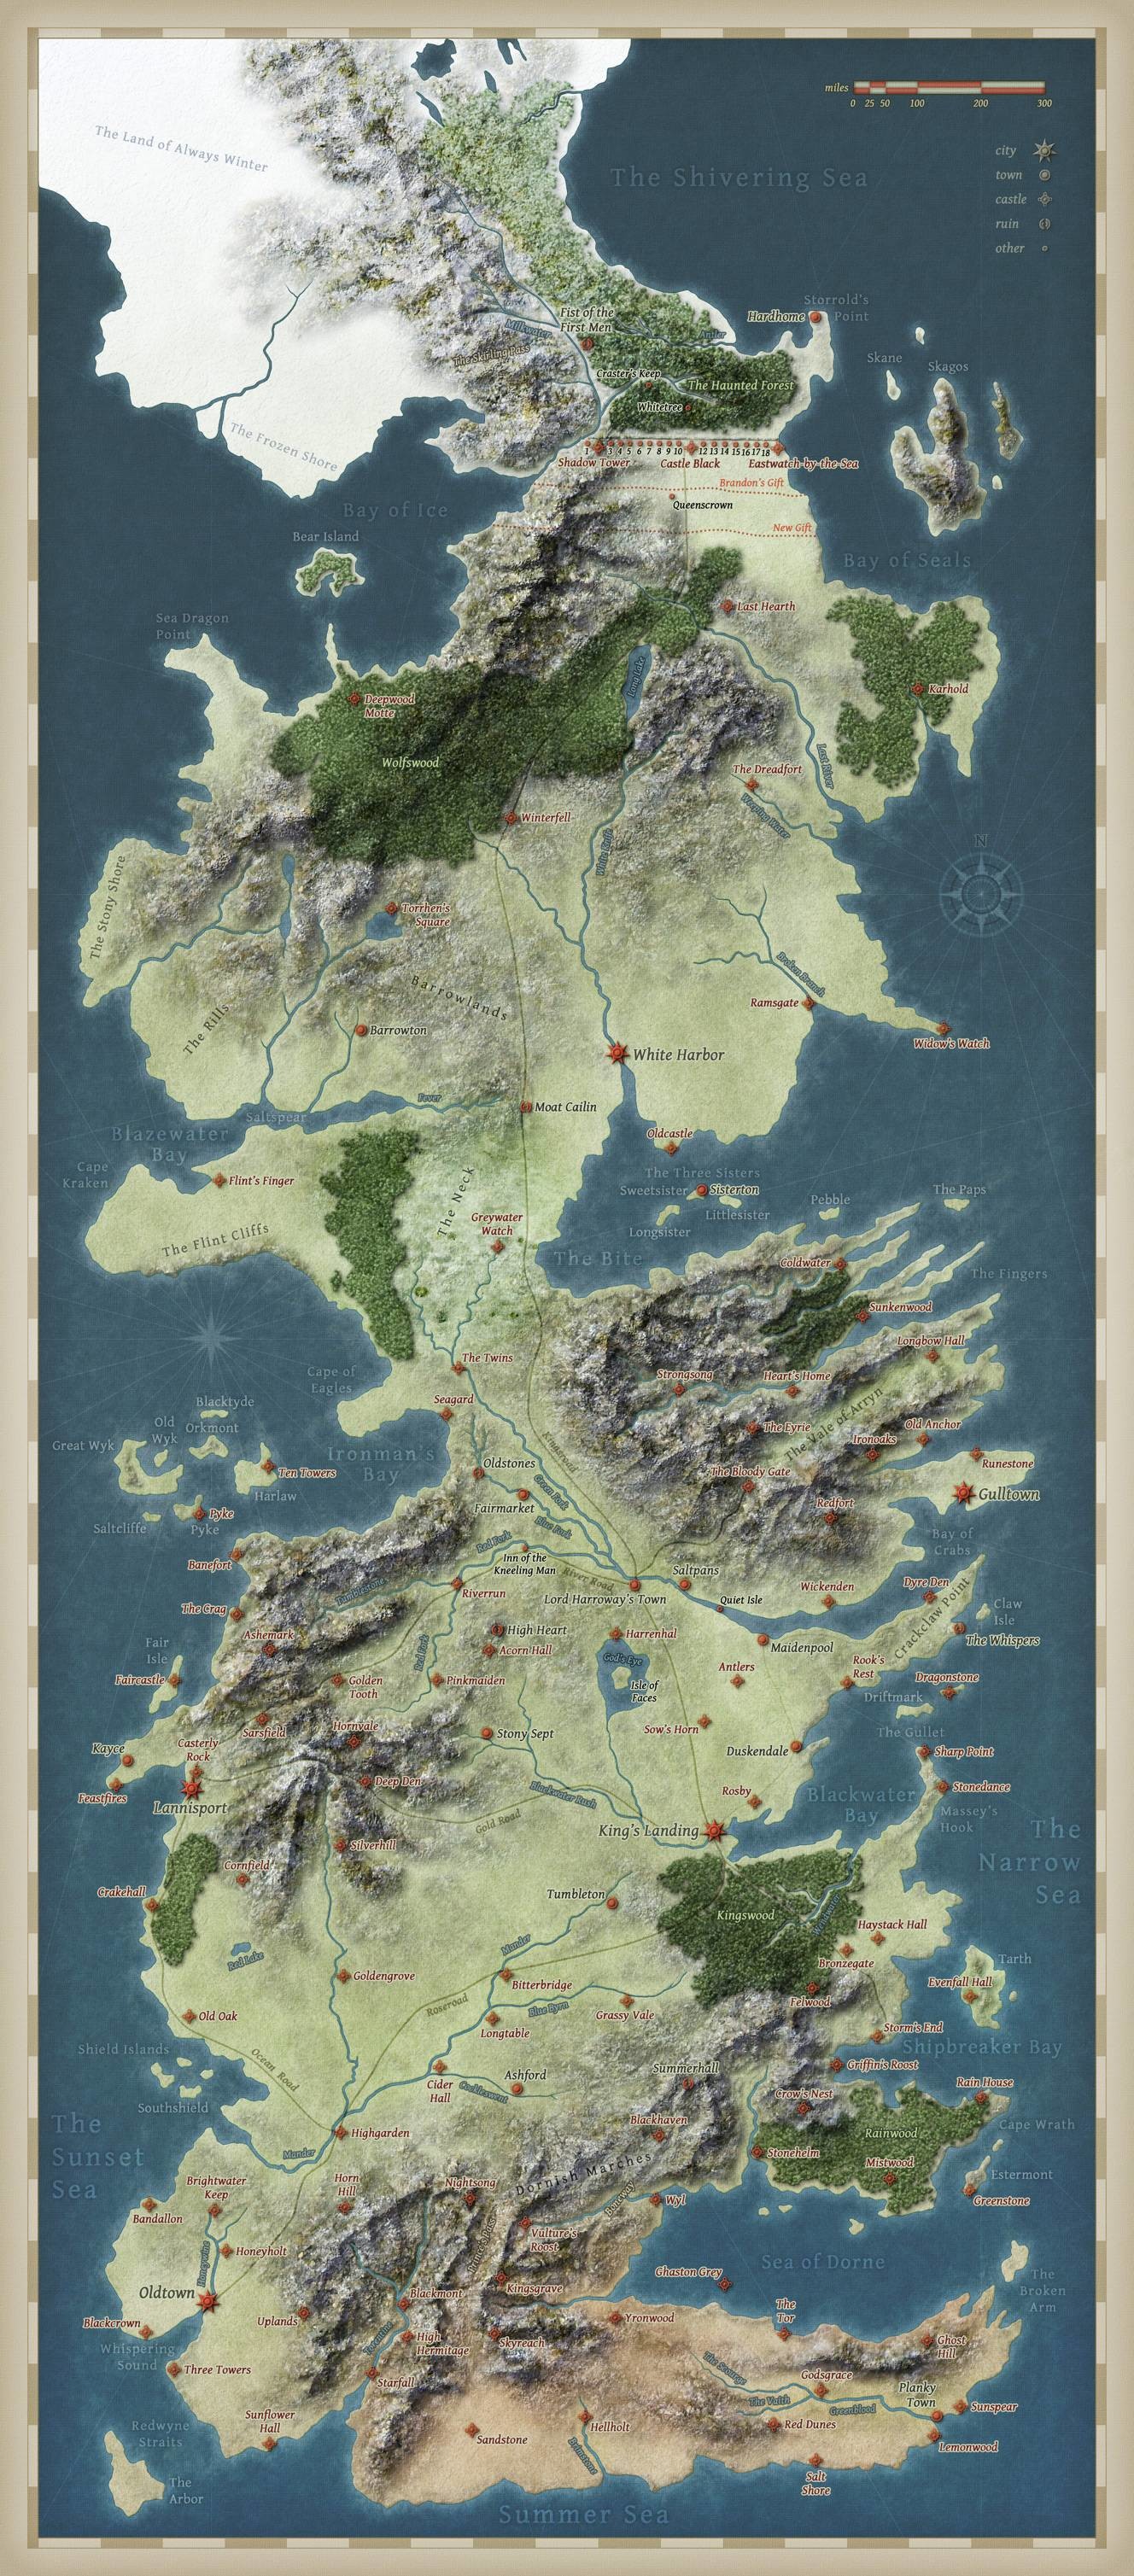 Map of Westeros, from George R. Martins epic fantasy series A Song of Ice and Fire and the HBO show Game of Thrones